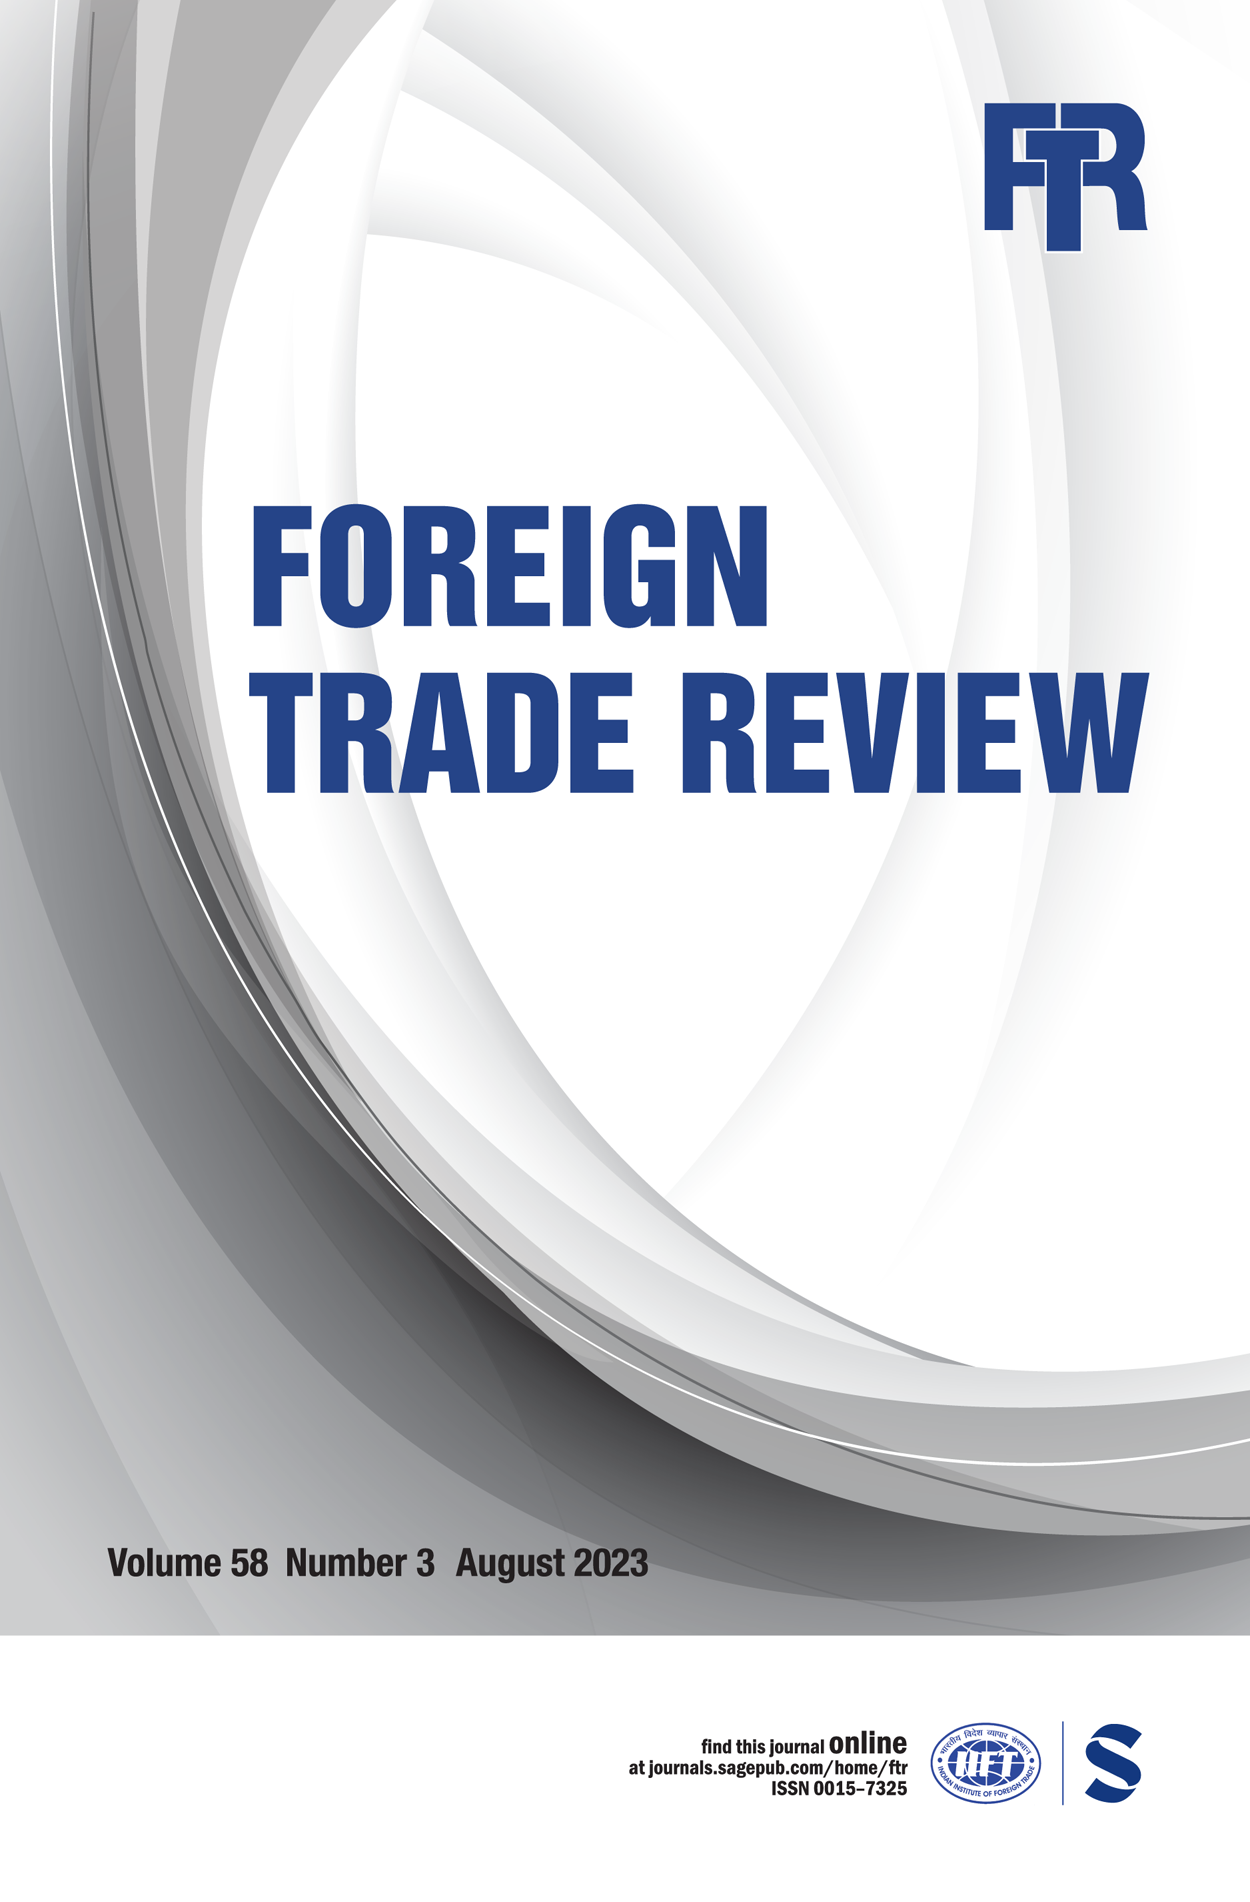 Foreign trade review.